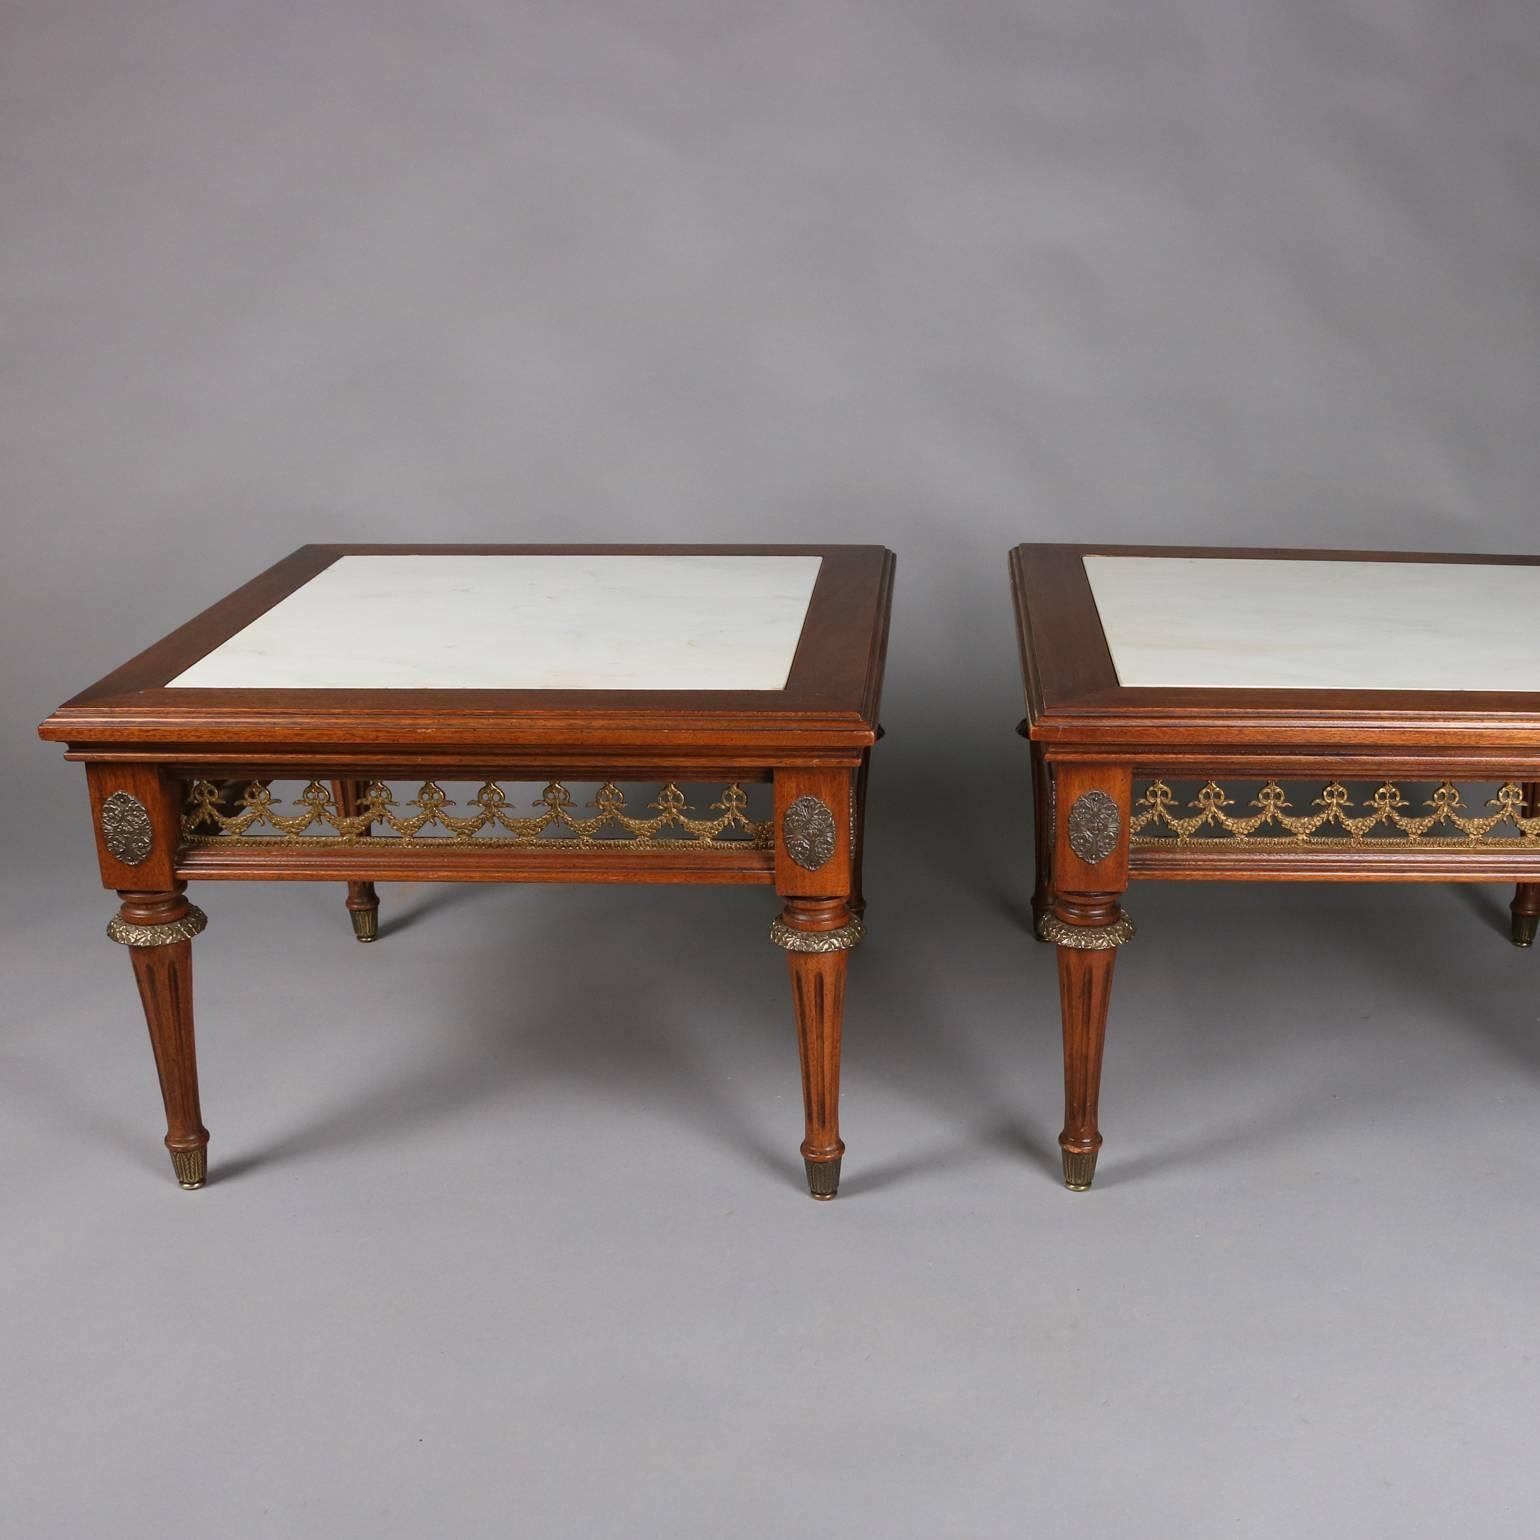 Cast Pair of Antique French Louis XVI Style Marble, Mahogany & Bronze Low Tables